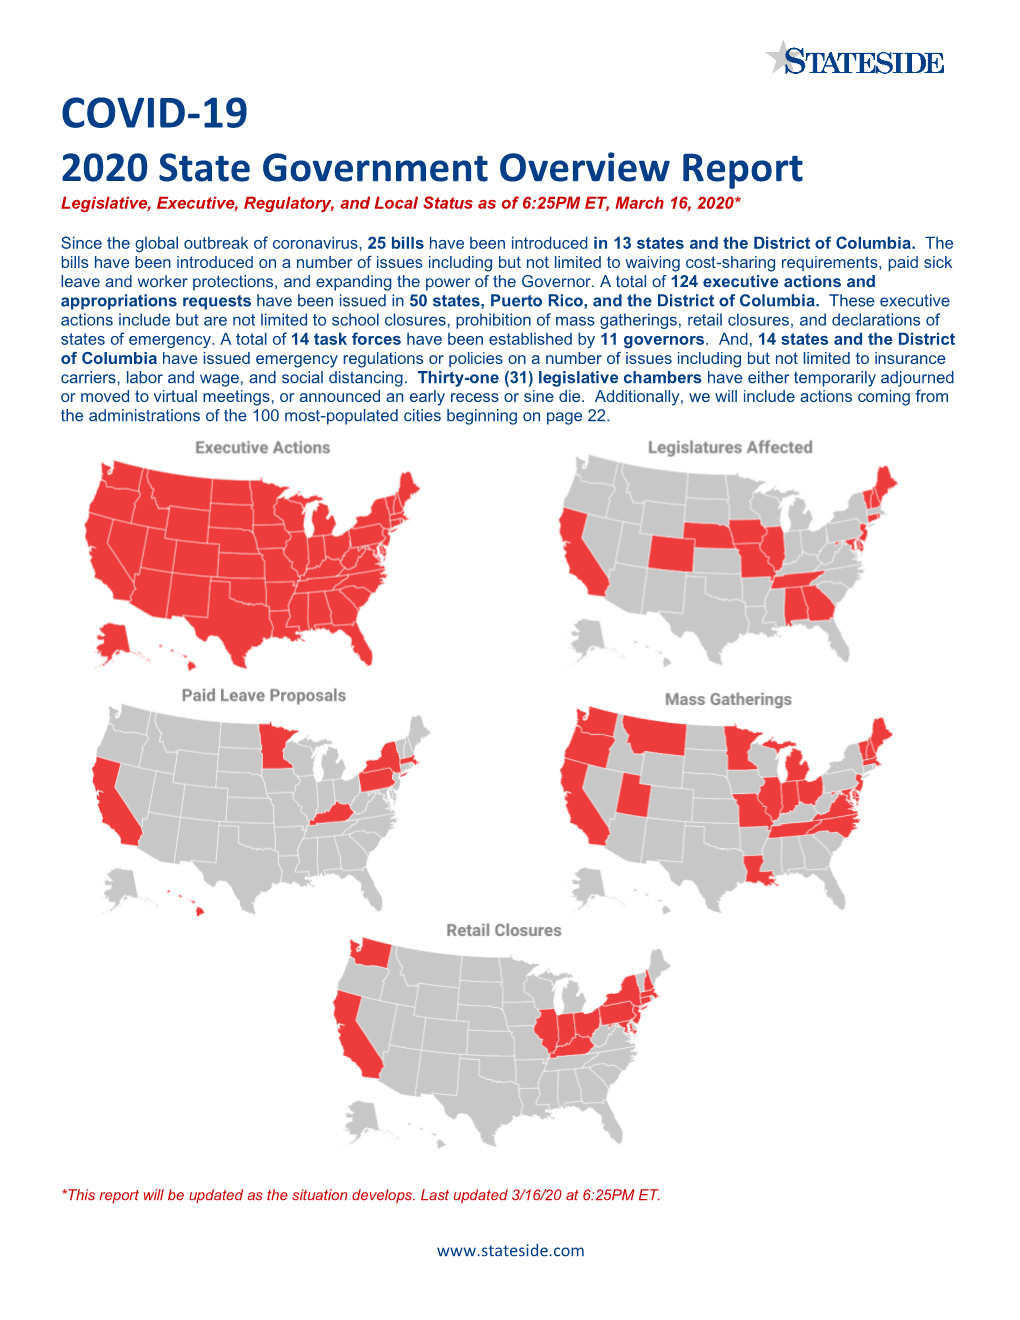 COVID-19 2020 State Government Overview Report Legislative, Executive, Regulatory, and Local Status As of 6:25PM ET, March 16, 2020*